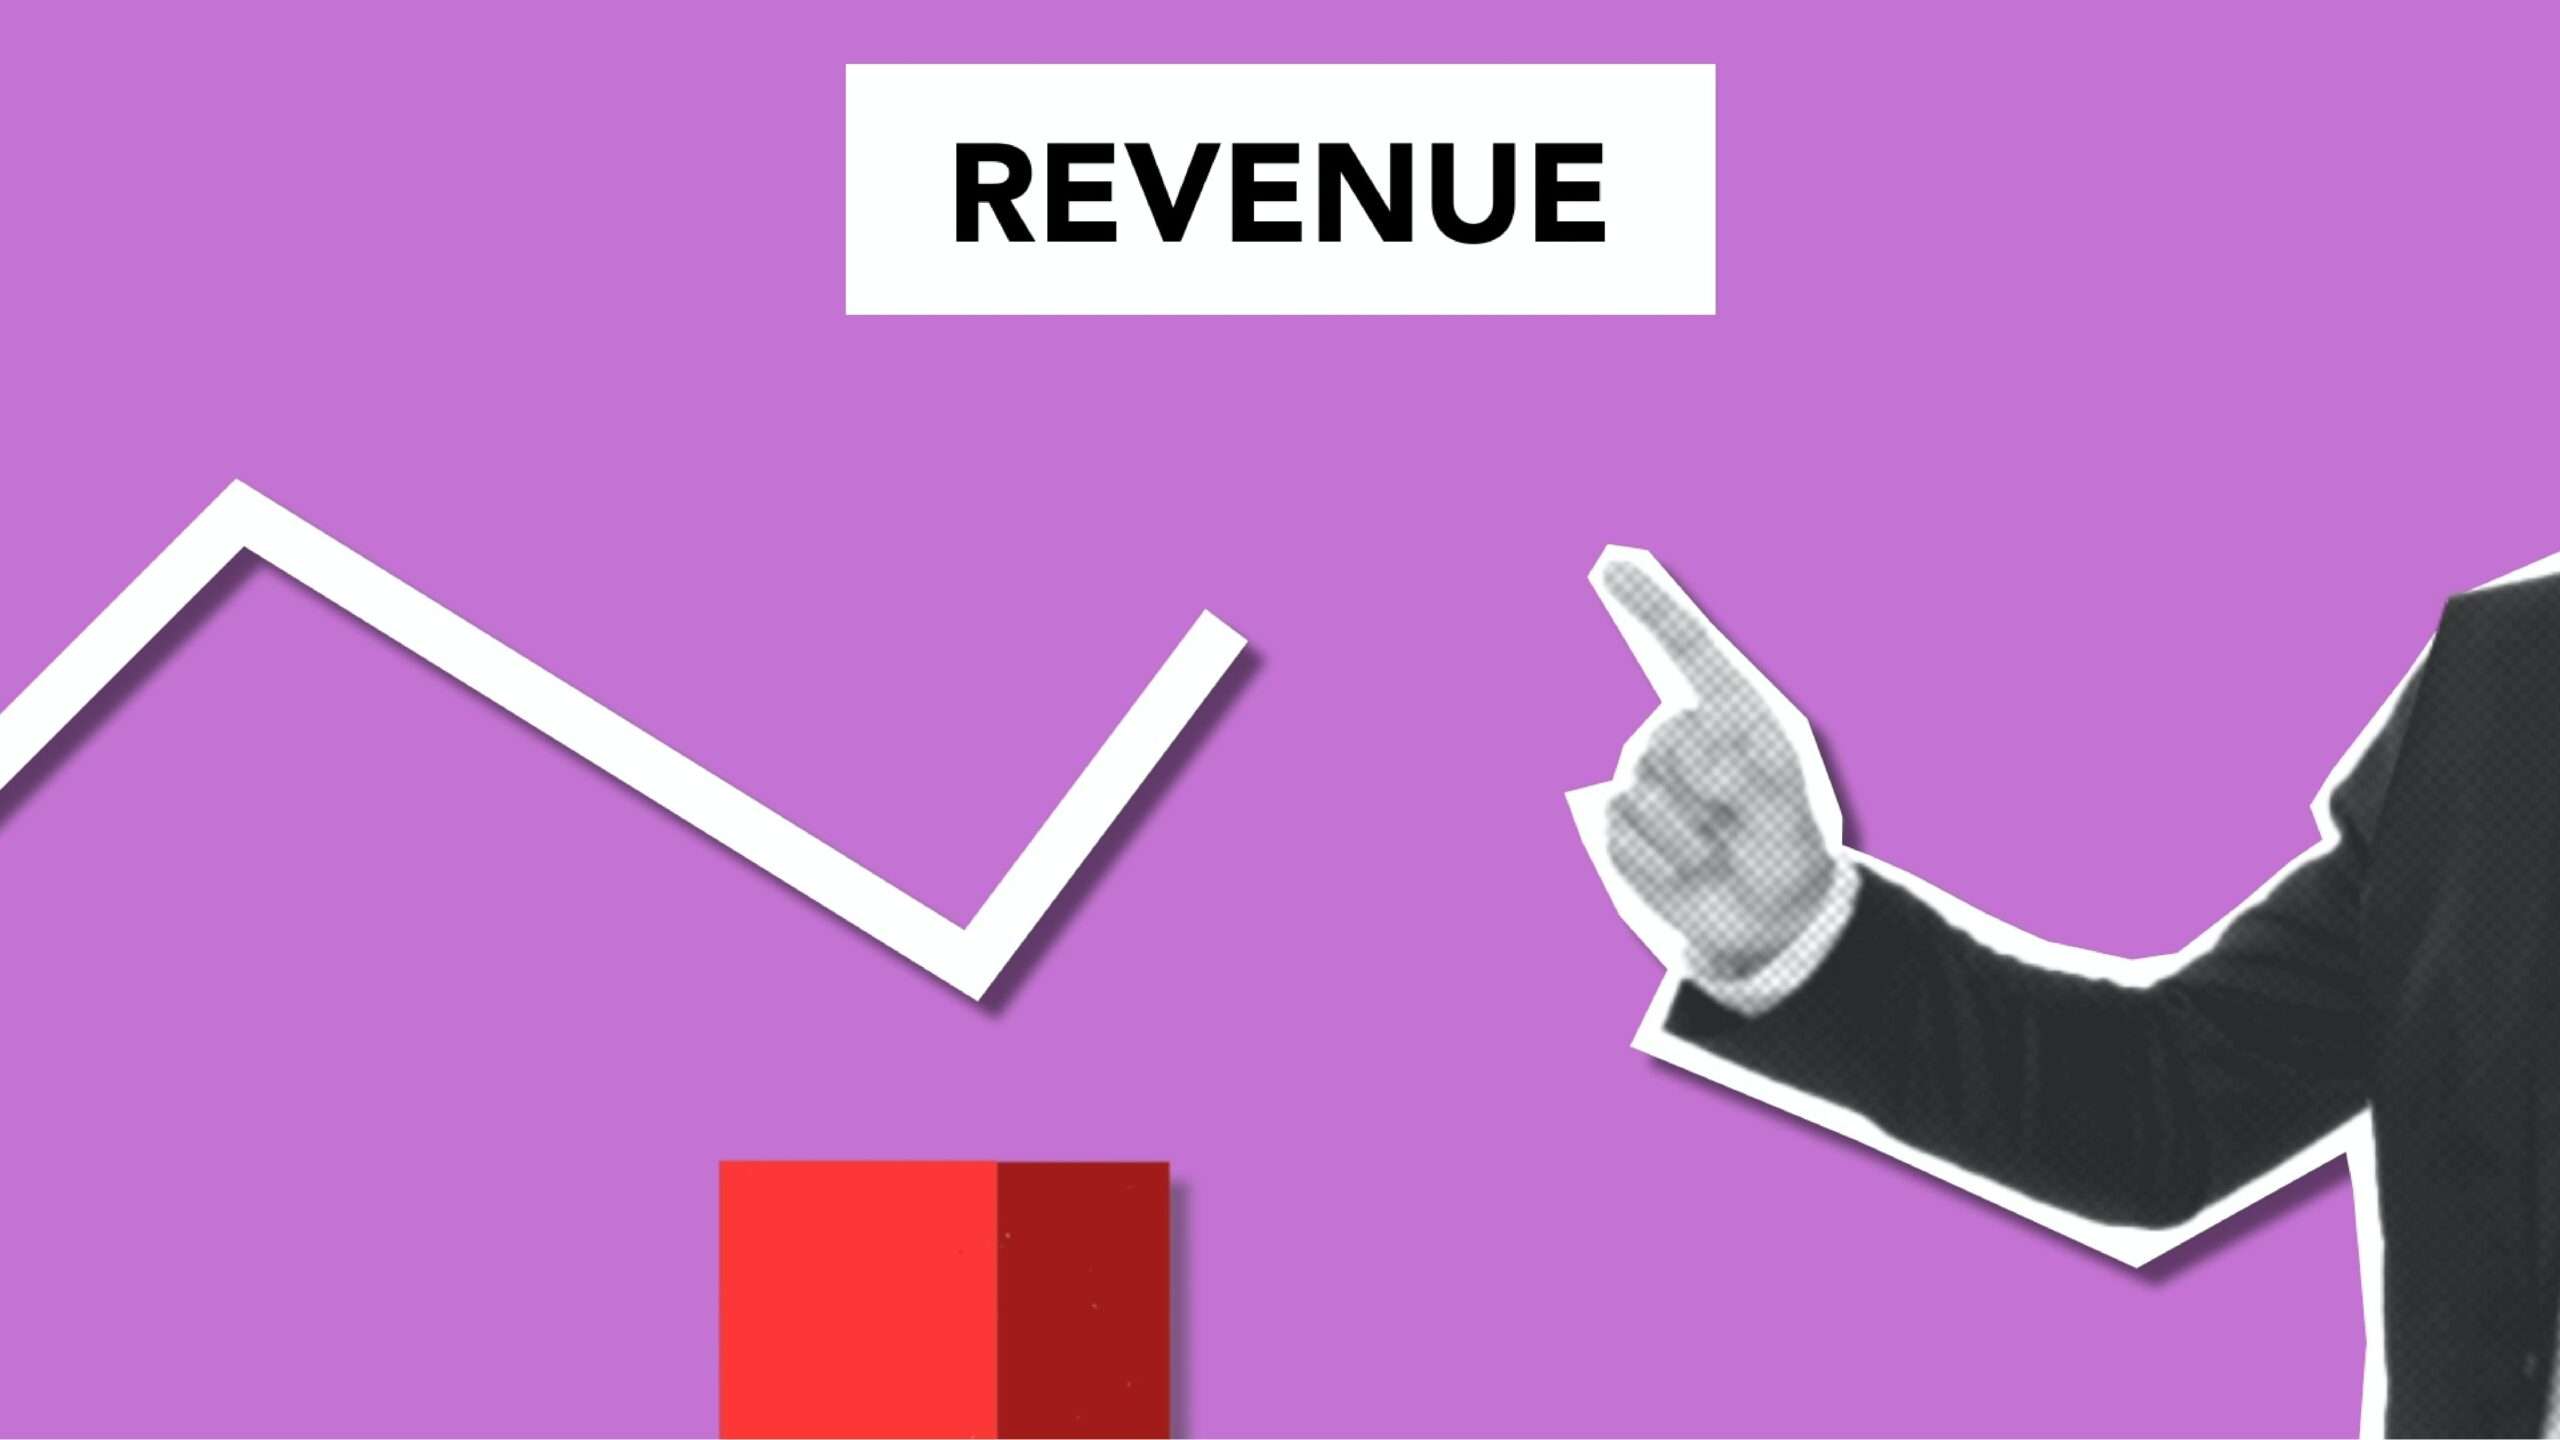 What Is The Difference Between Business Revenue And Profit?